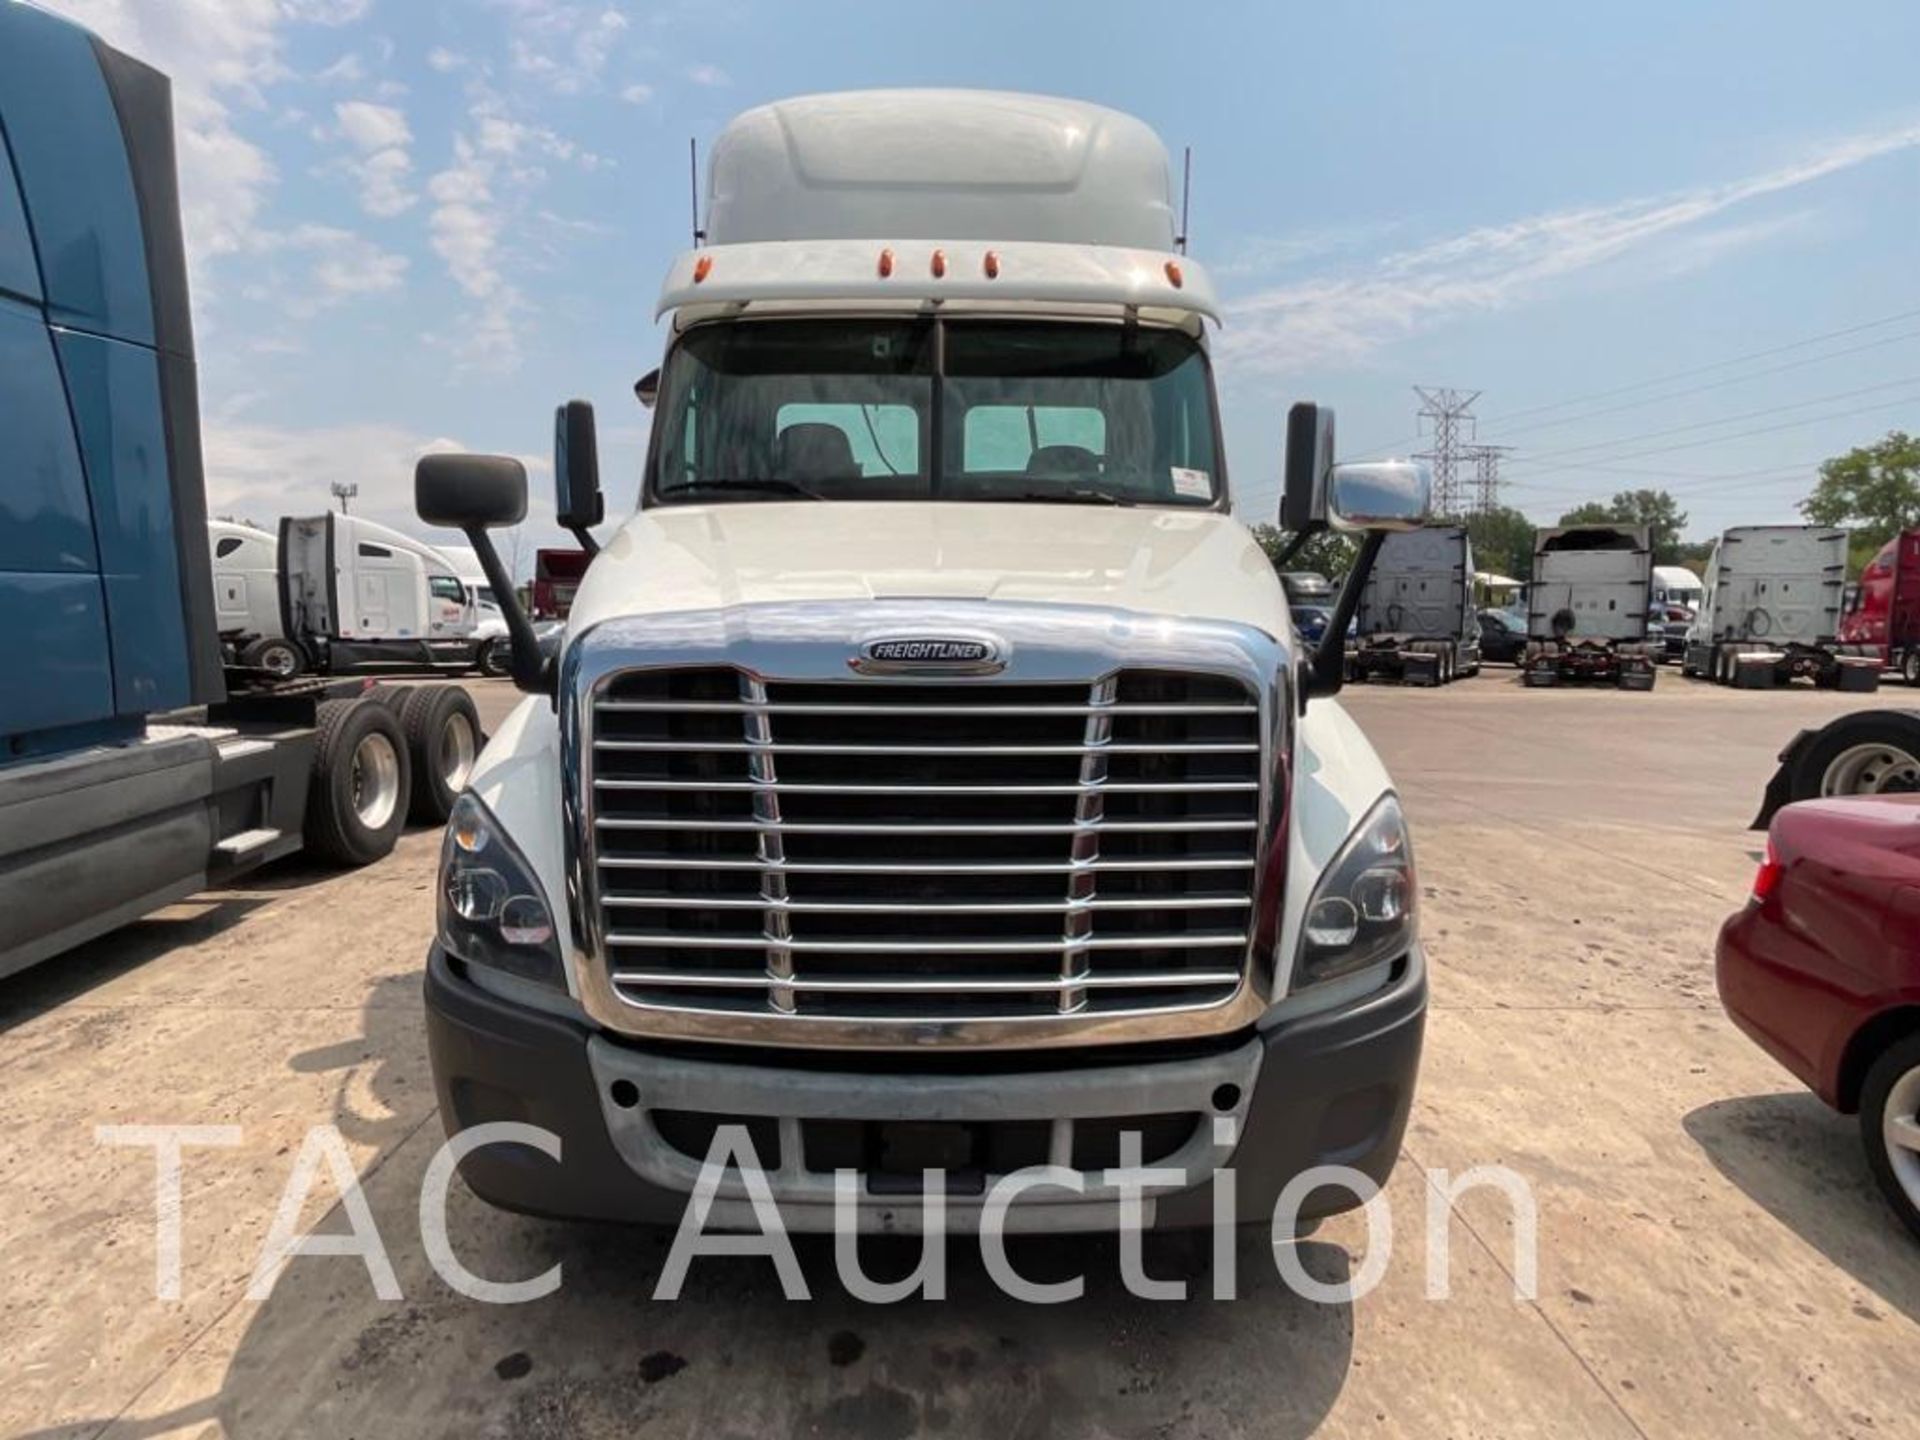 2020 Freightliner Cascadia Day Cab - Image 2 of 50